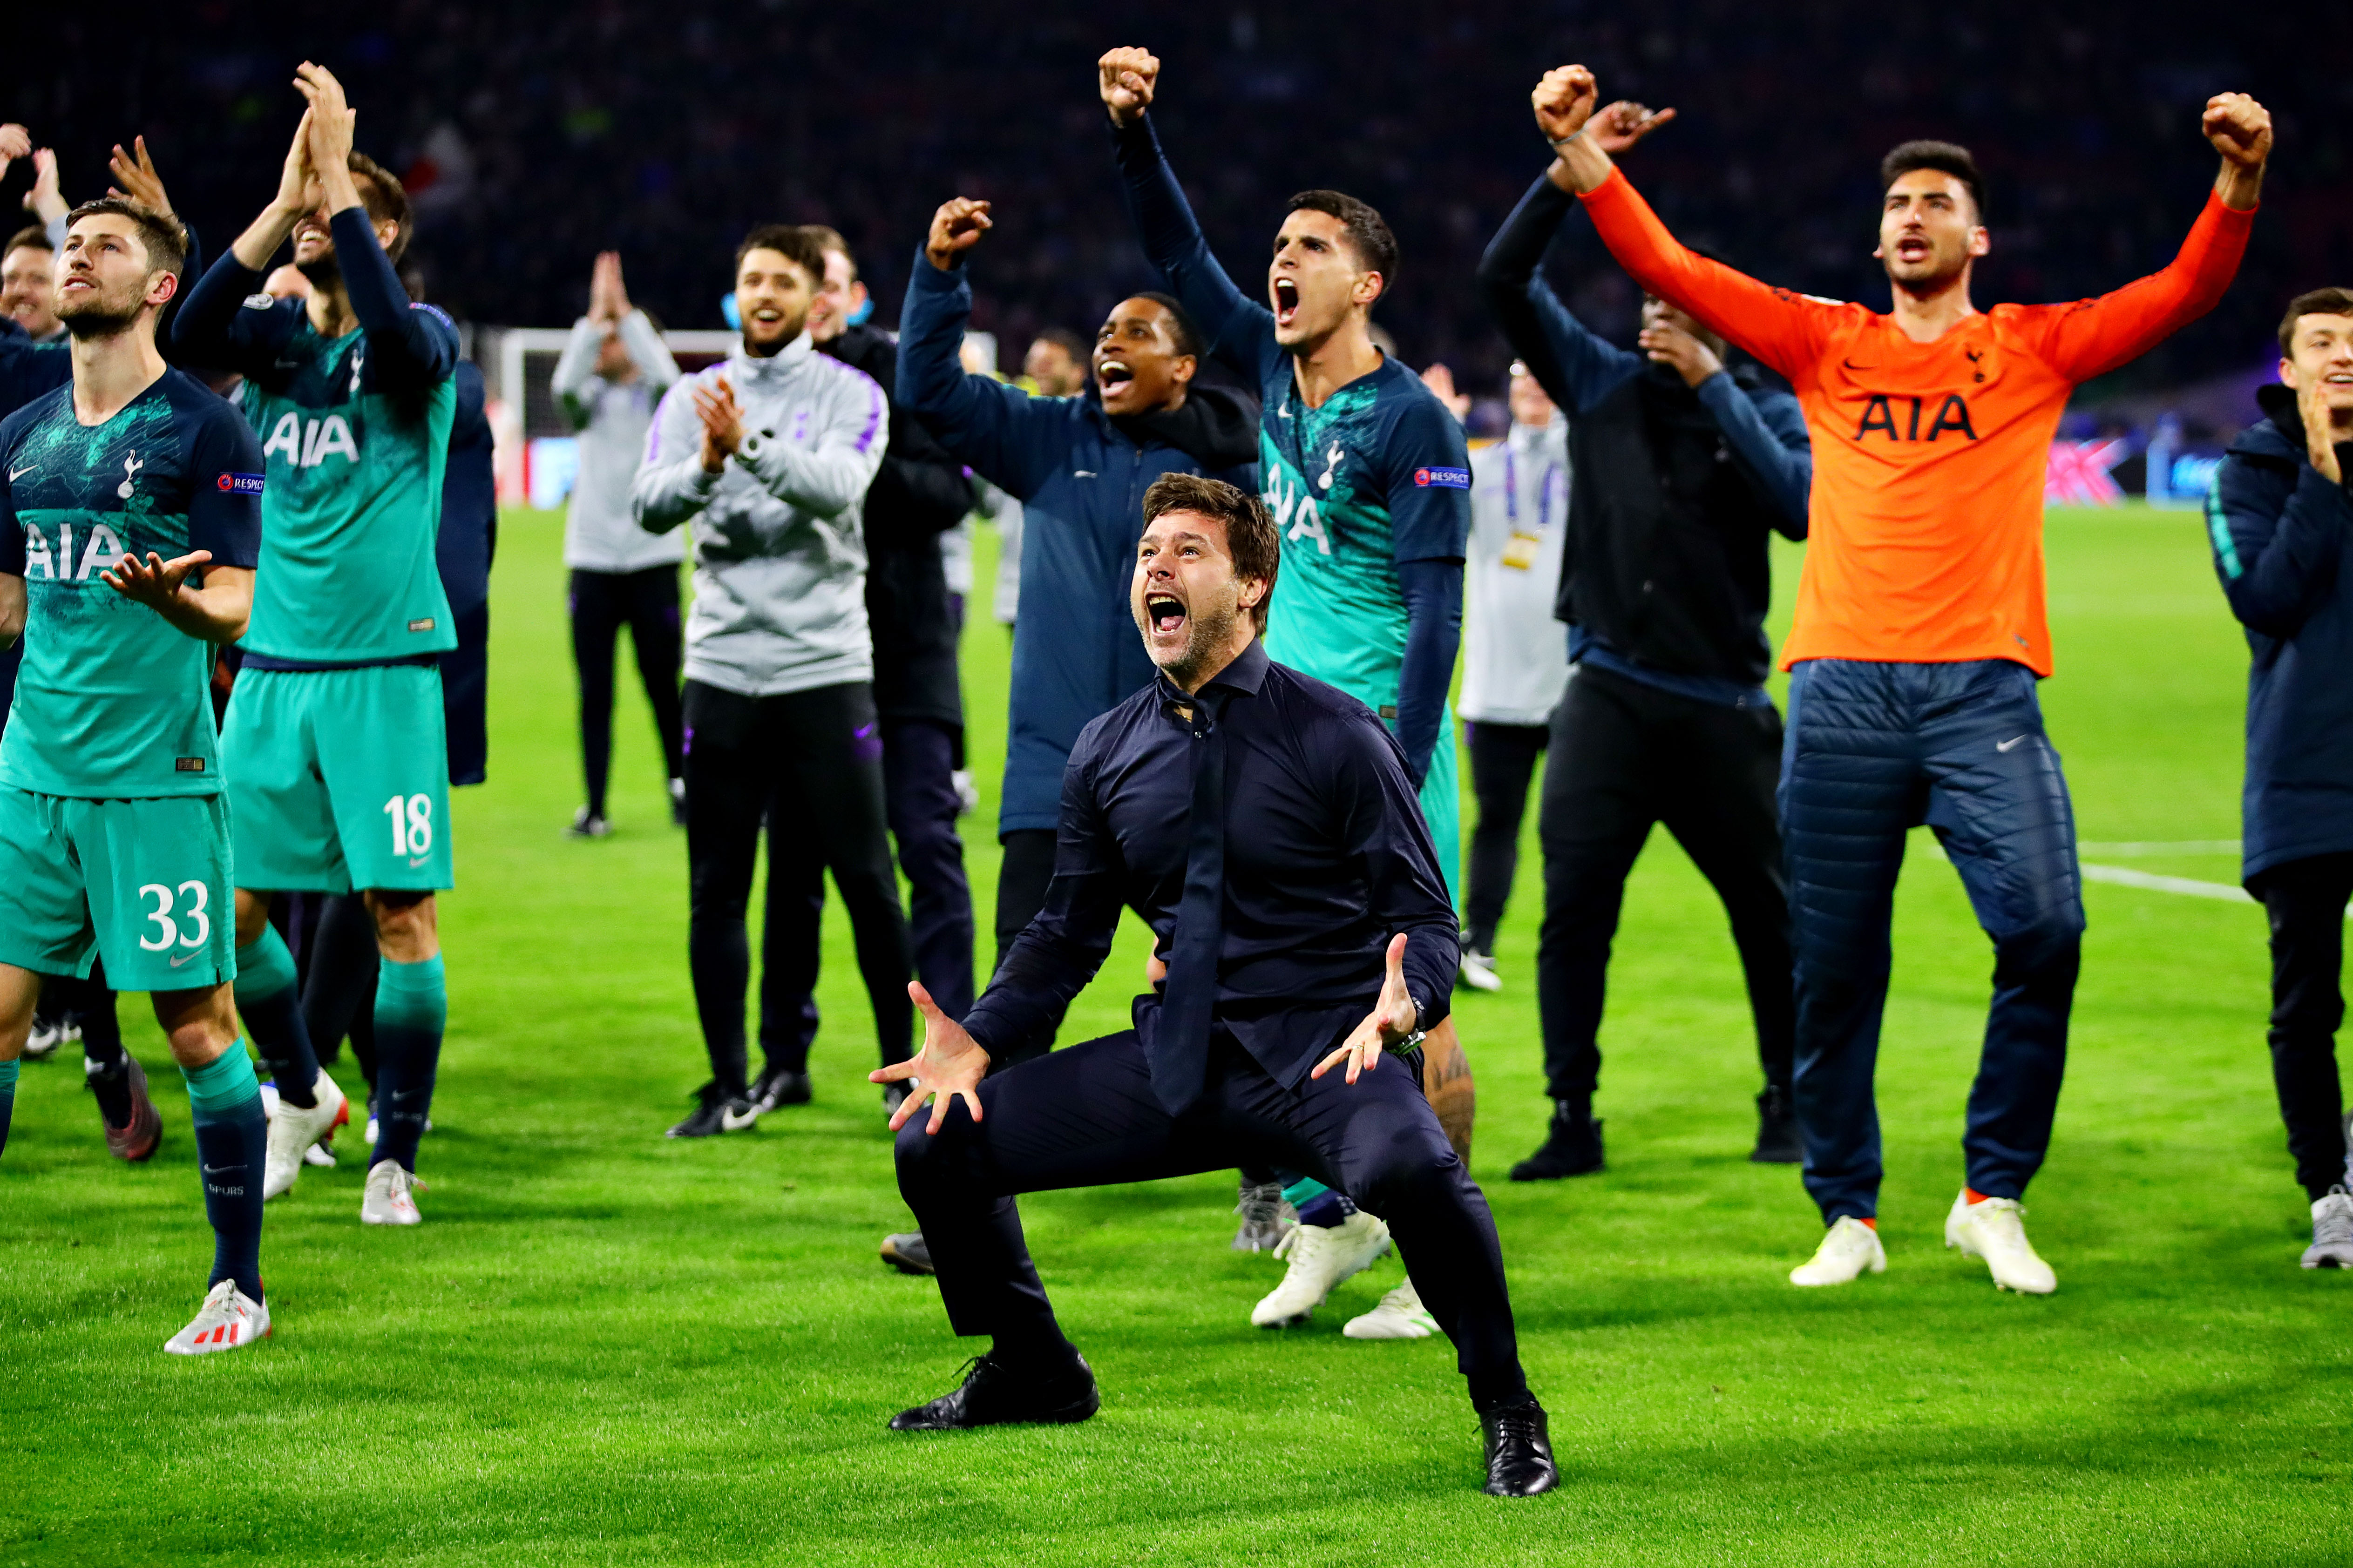 Pochettino is incredible - pulled off a miracle, says Tottenham